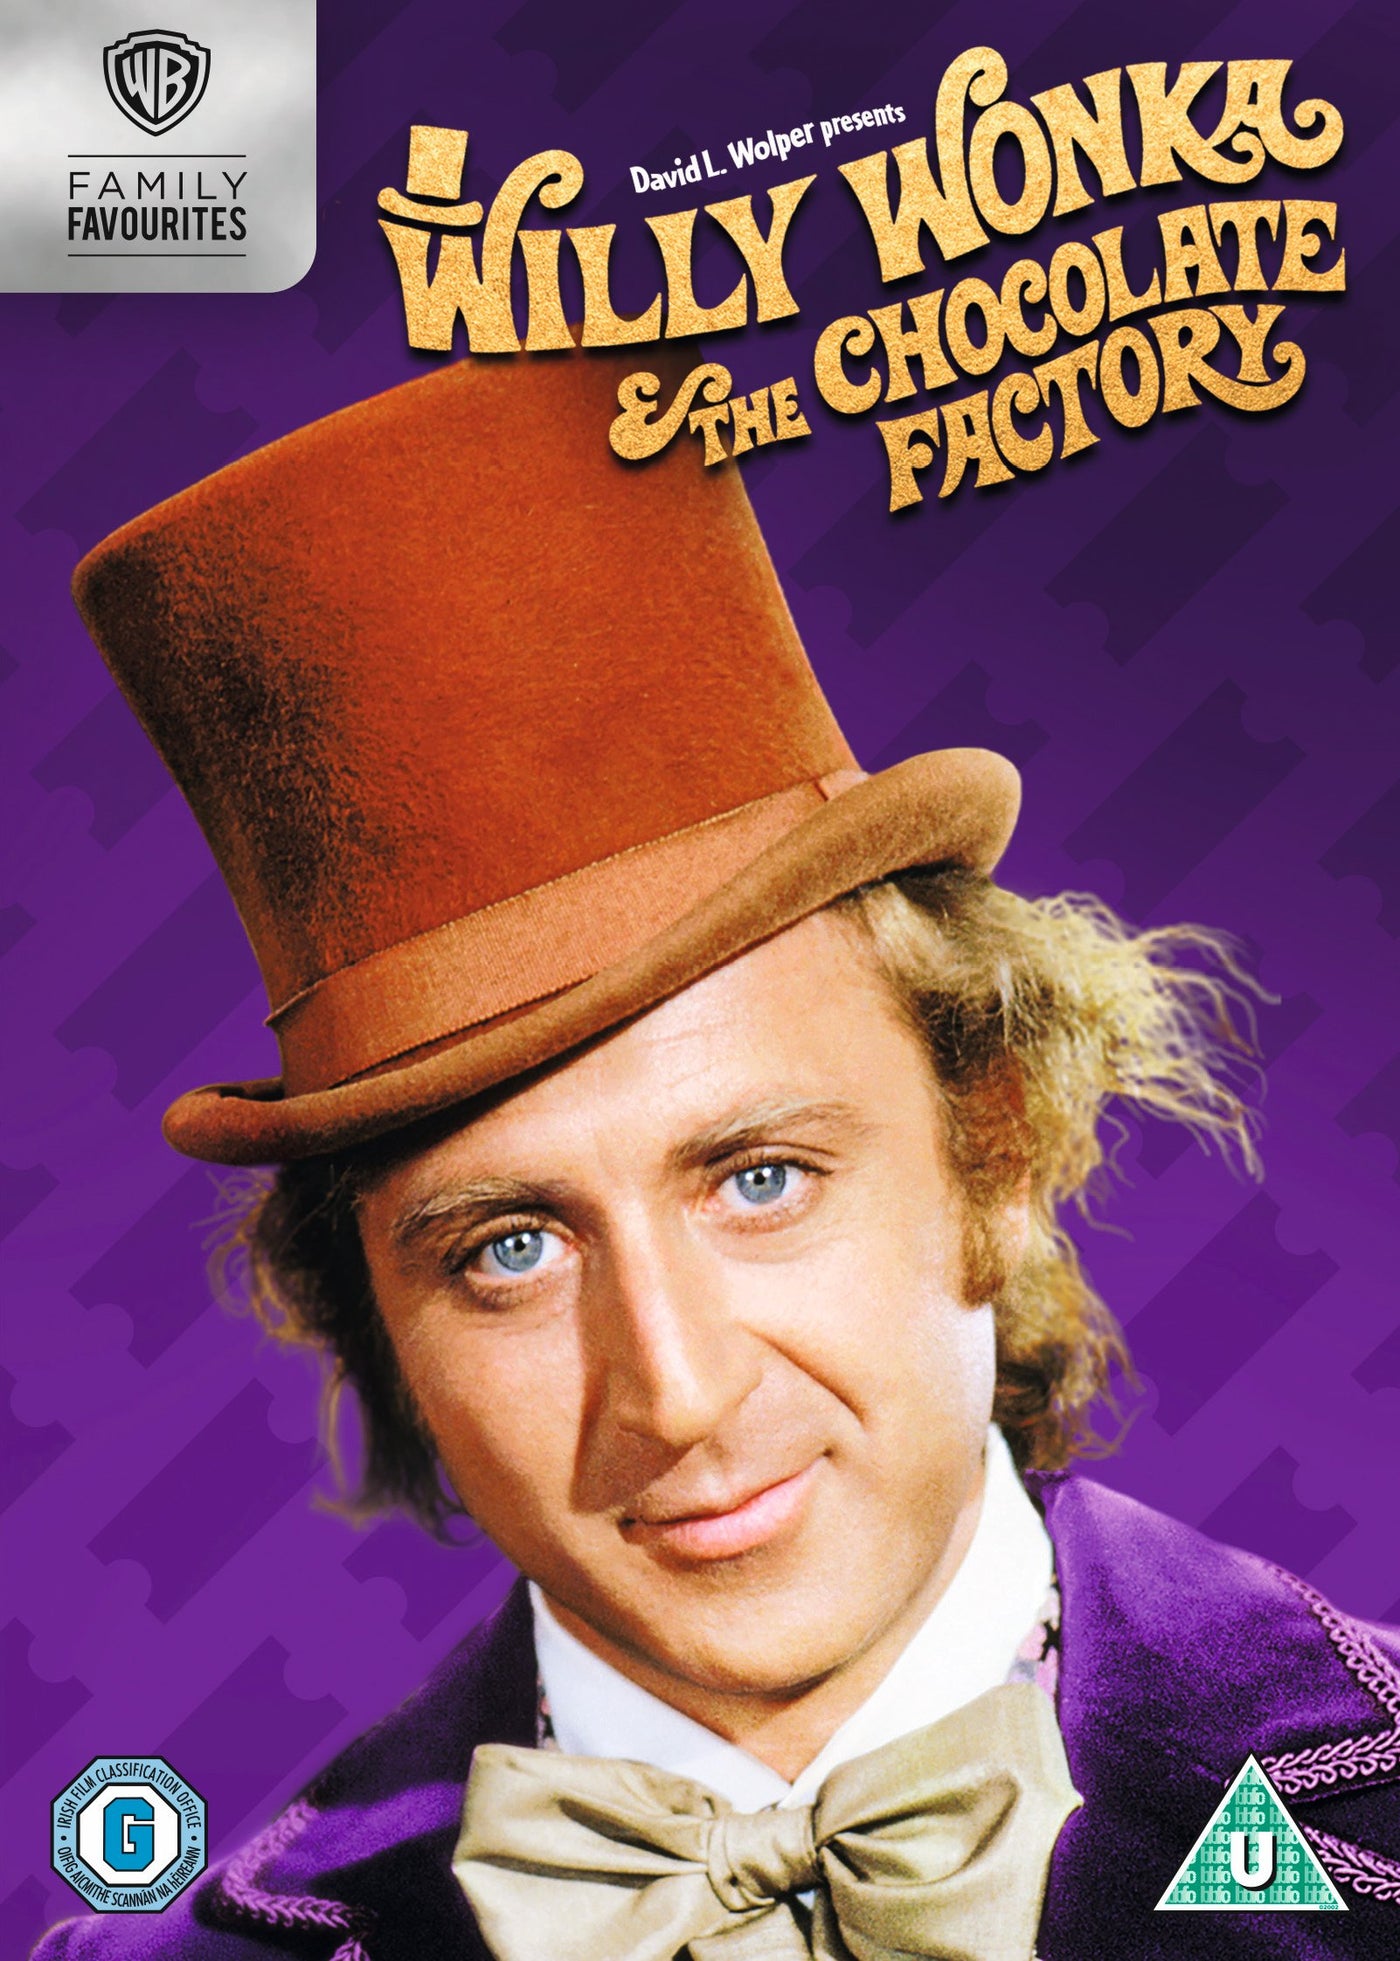 Willy Wonka and the Chocolate Factory (DVD)